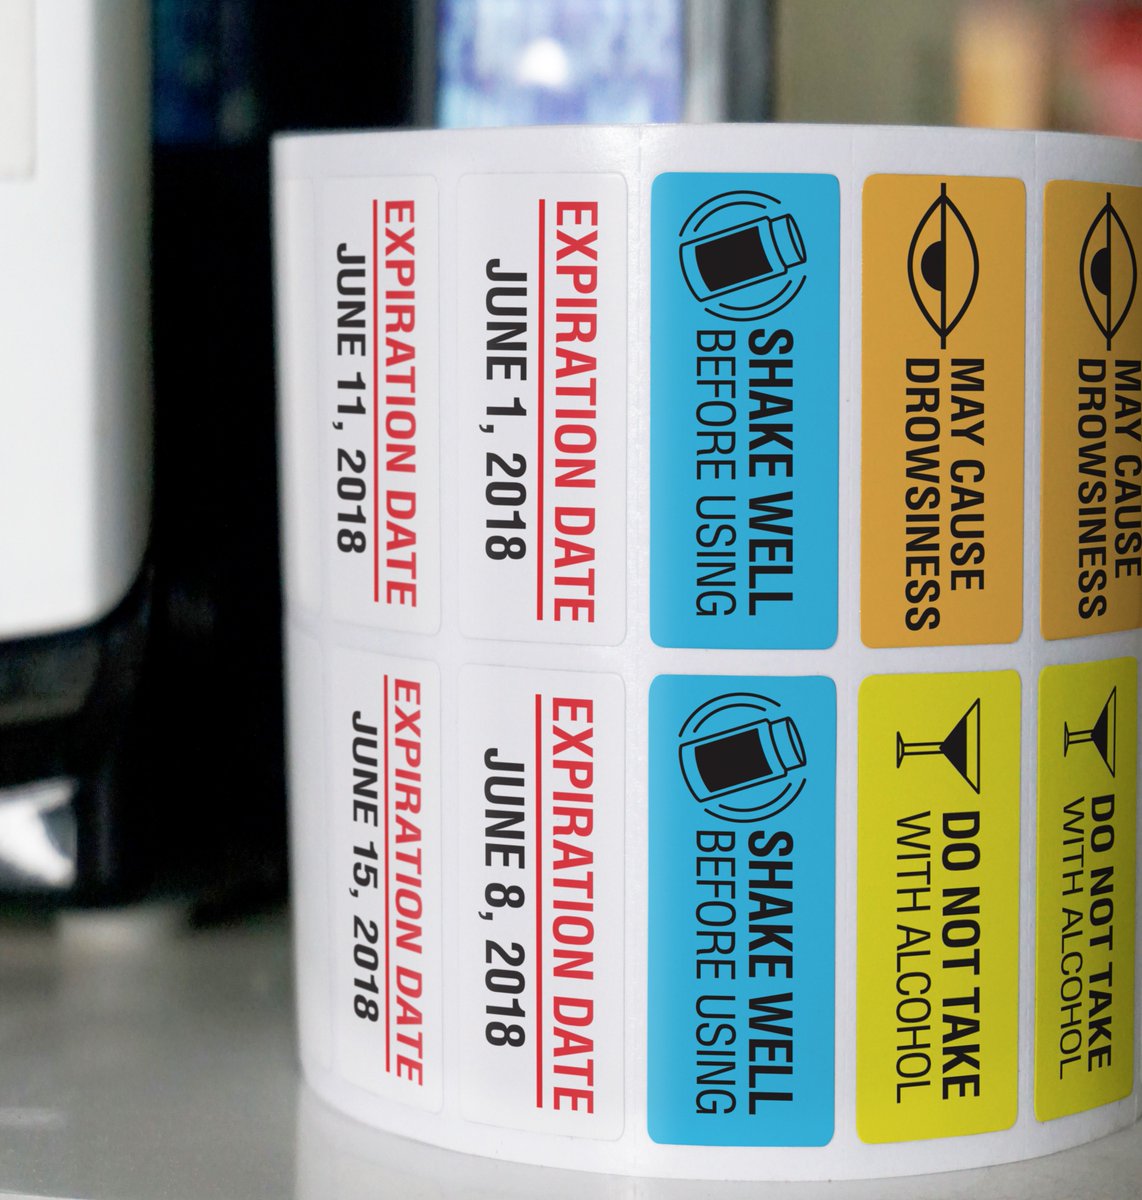 Neenah Launches KIMDURA(R) Universal HC at #Labelexpo, enabling compact/desktop dye- or pigment-based aqueous #inkjets, to print full color #printondemand #durablelabels without the need of additional lamination. More details at neenahperformance.com/kimdura